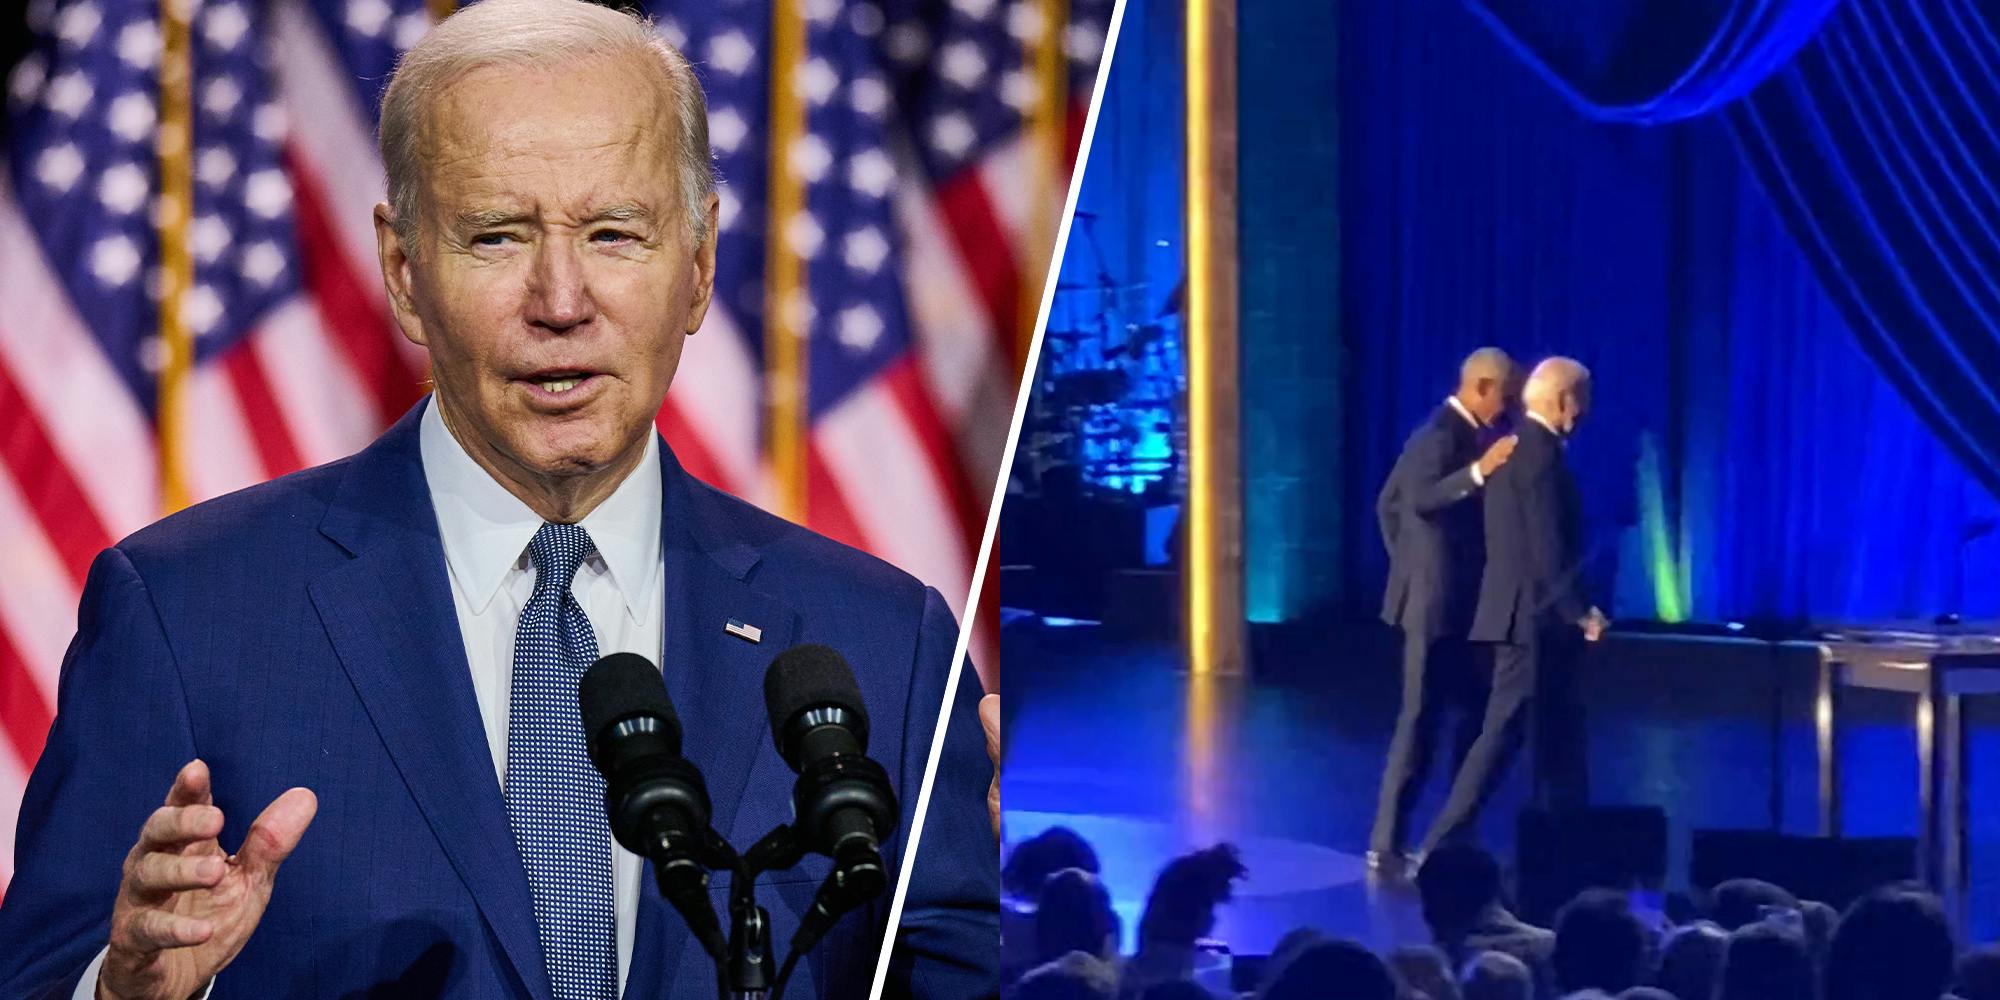 The internet is divided over a video of Biden and Obama at a fundraiser